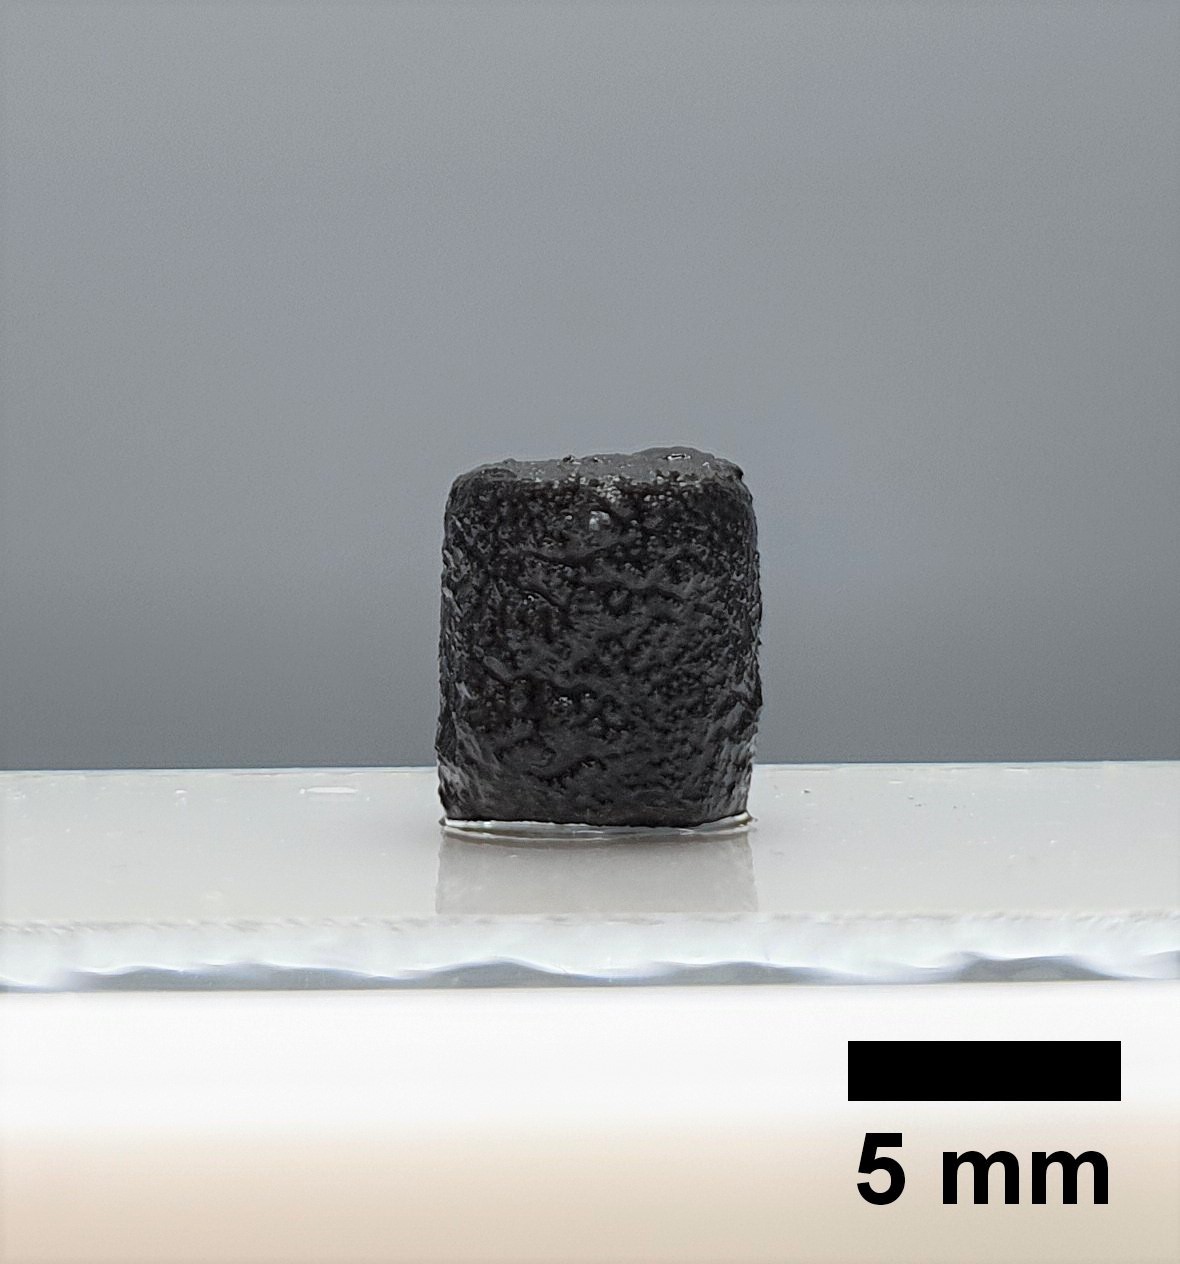 The electrically conductive hydrogel